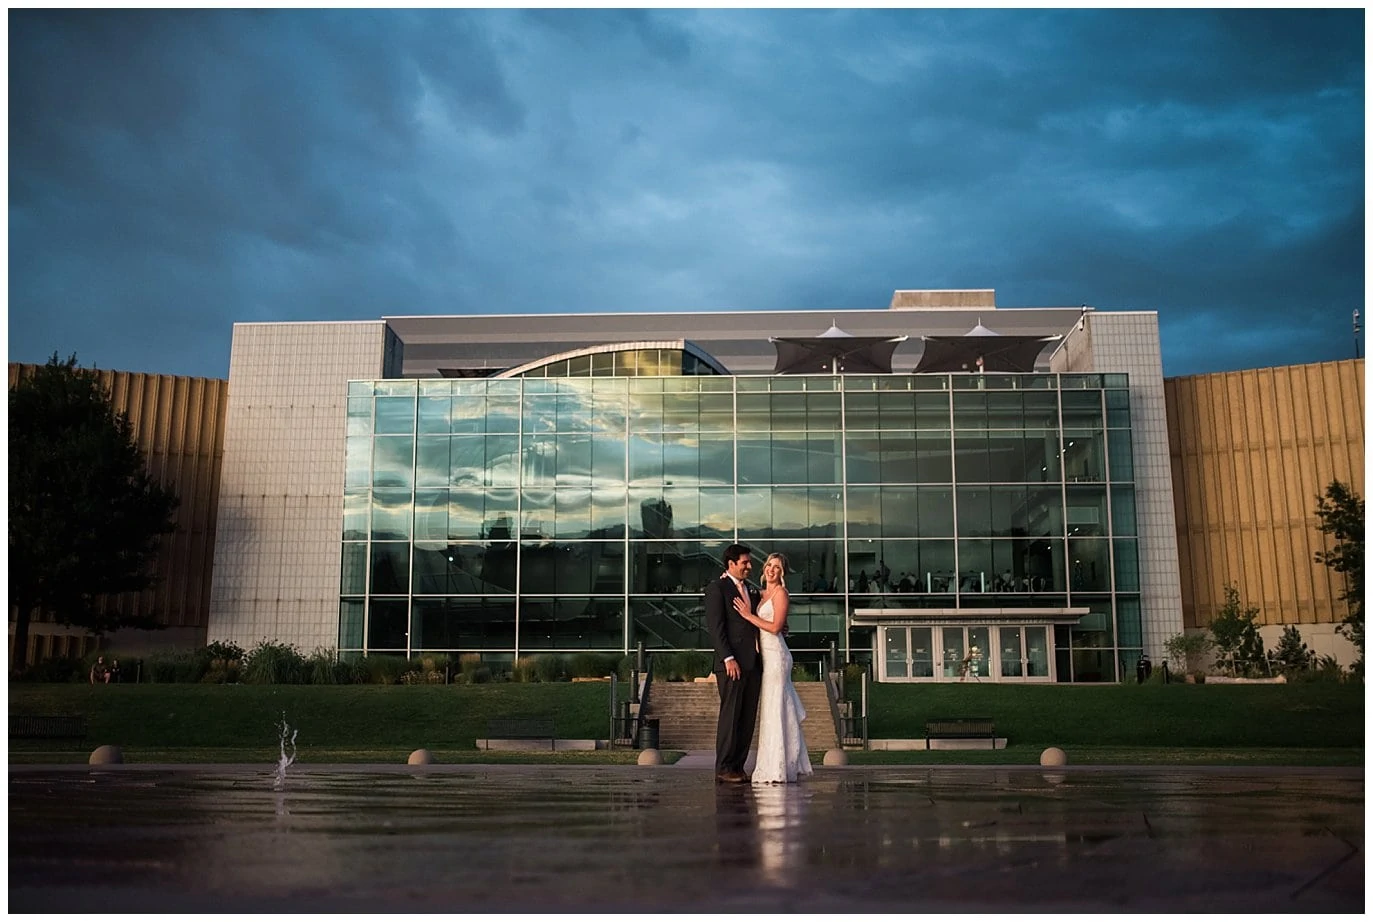 Denver Museum of Nature and Science wedding photo